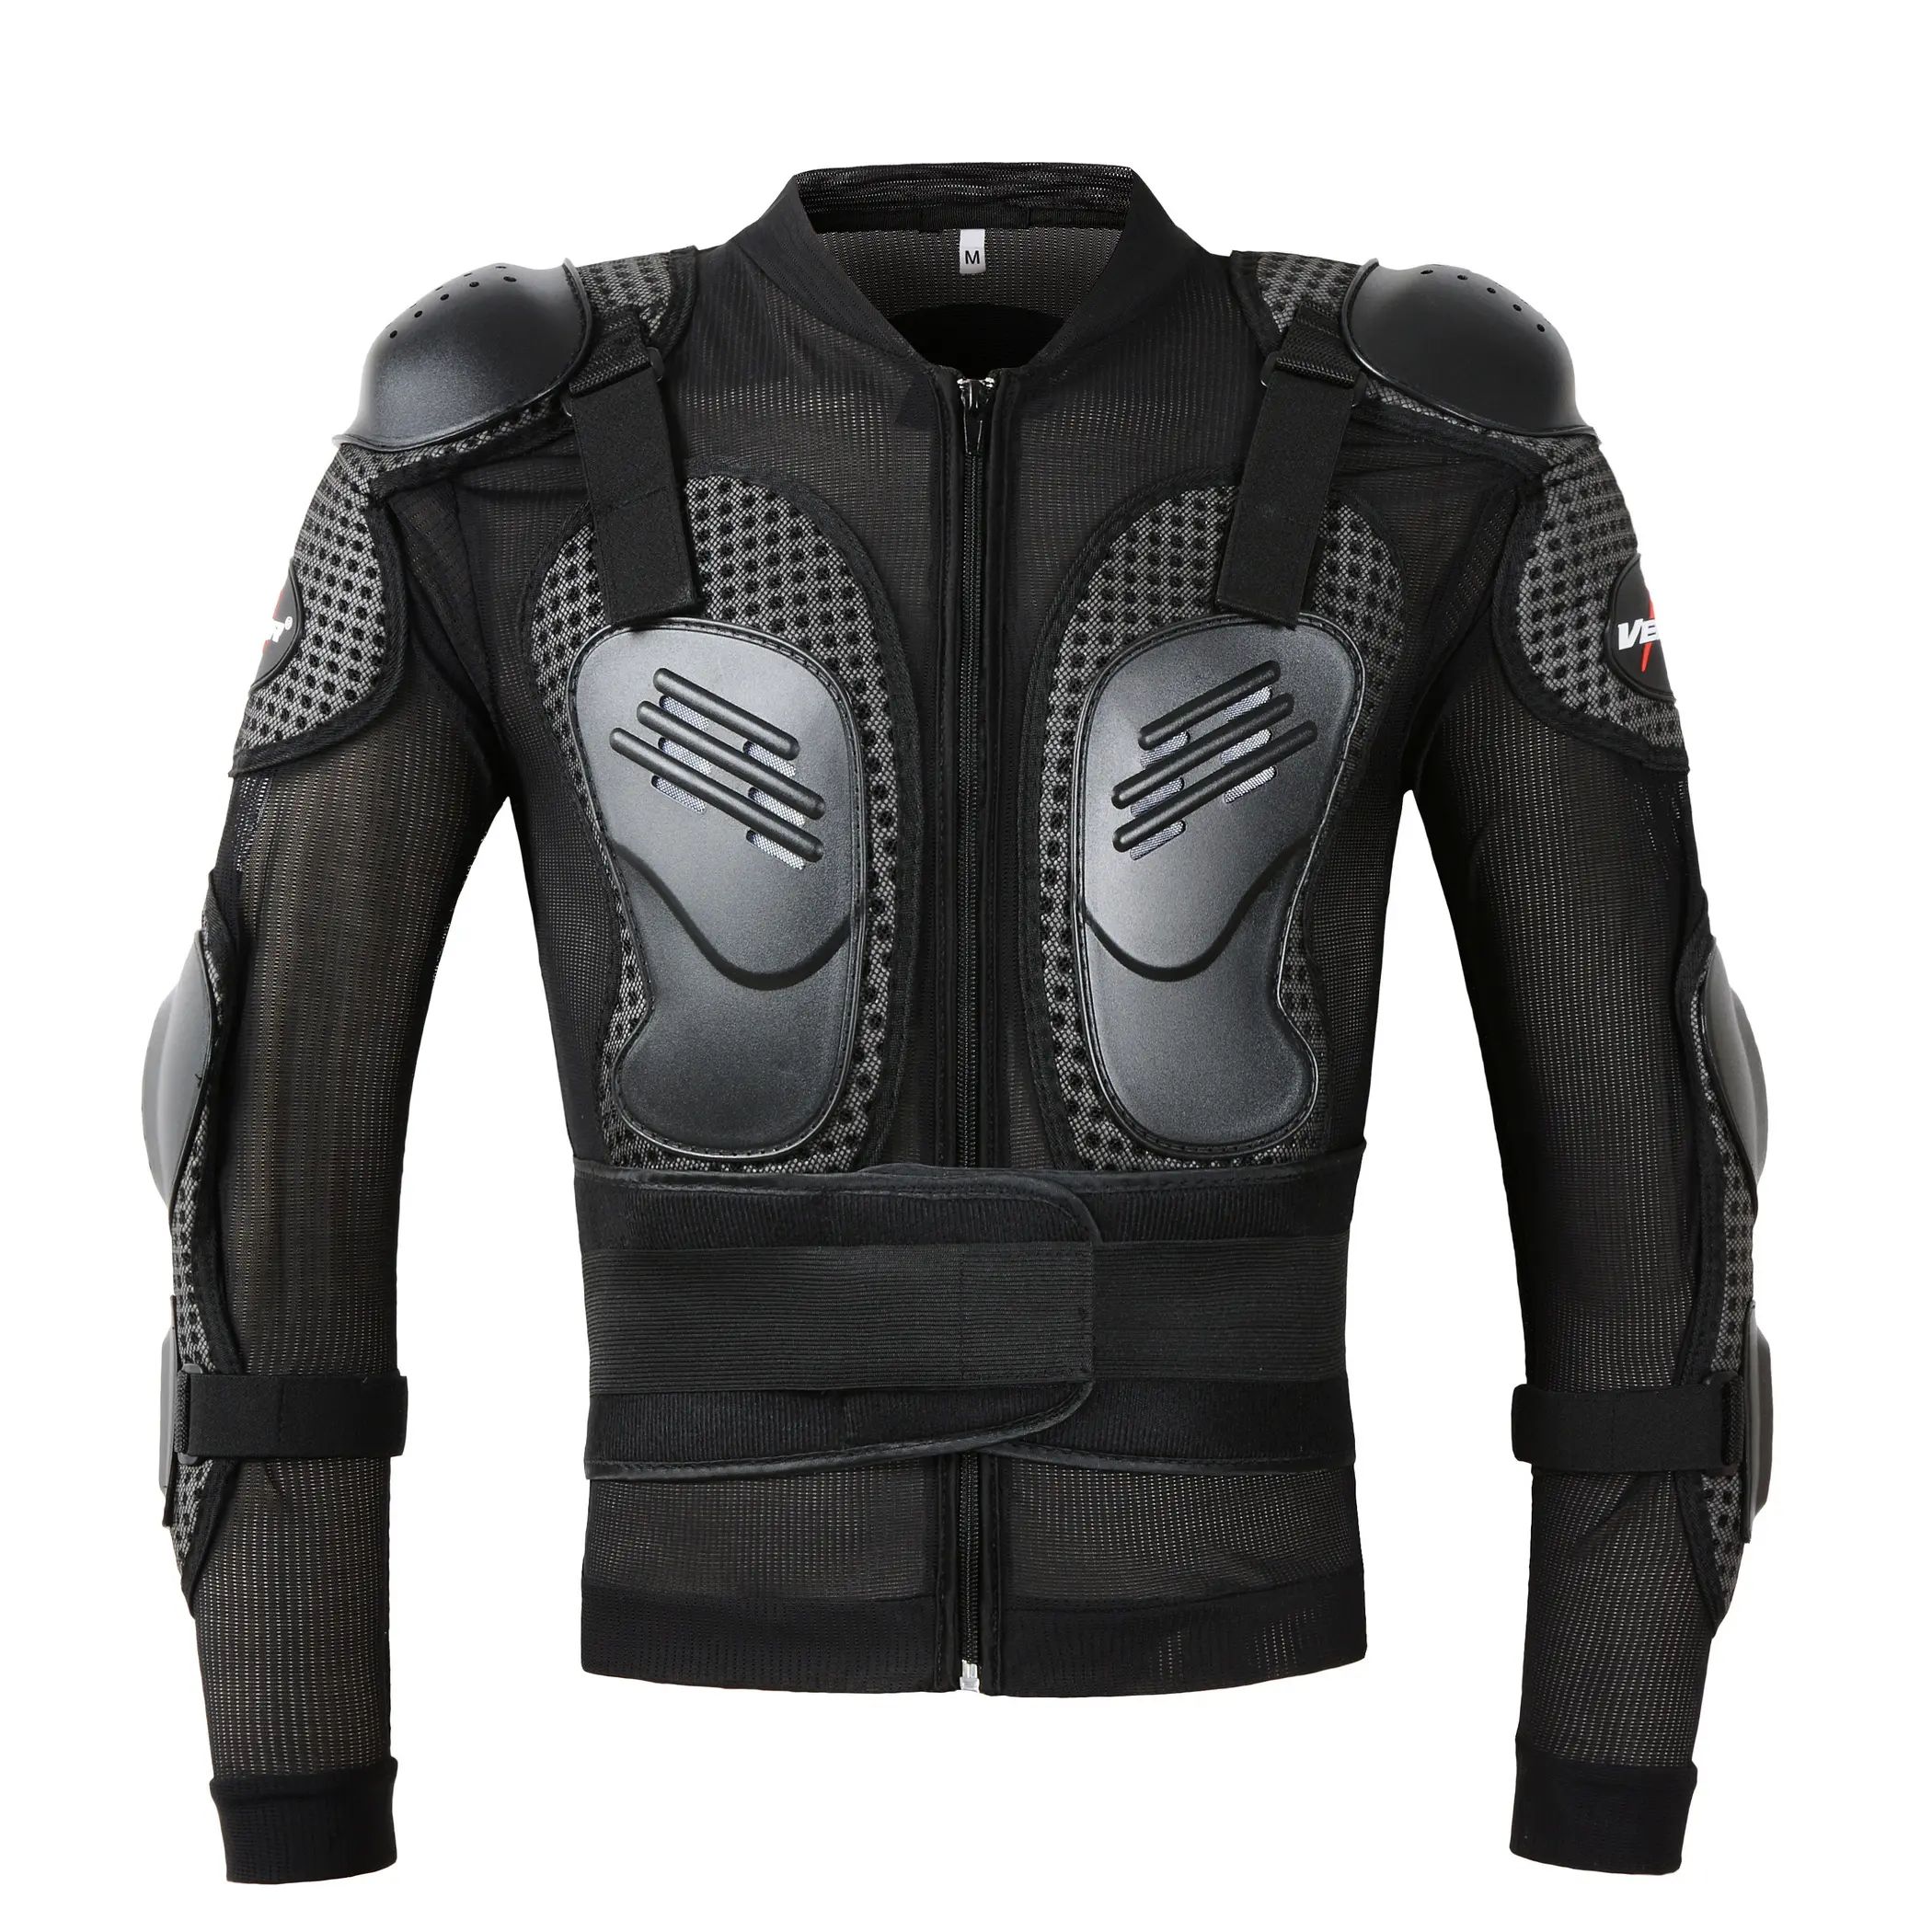 VEMAR Plate Carrier Lightweight Tactical cycling racing riding armor Tactical Vest Light Armor